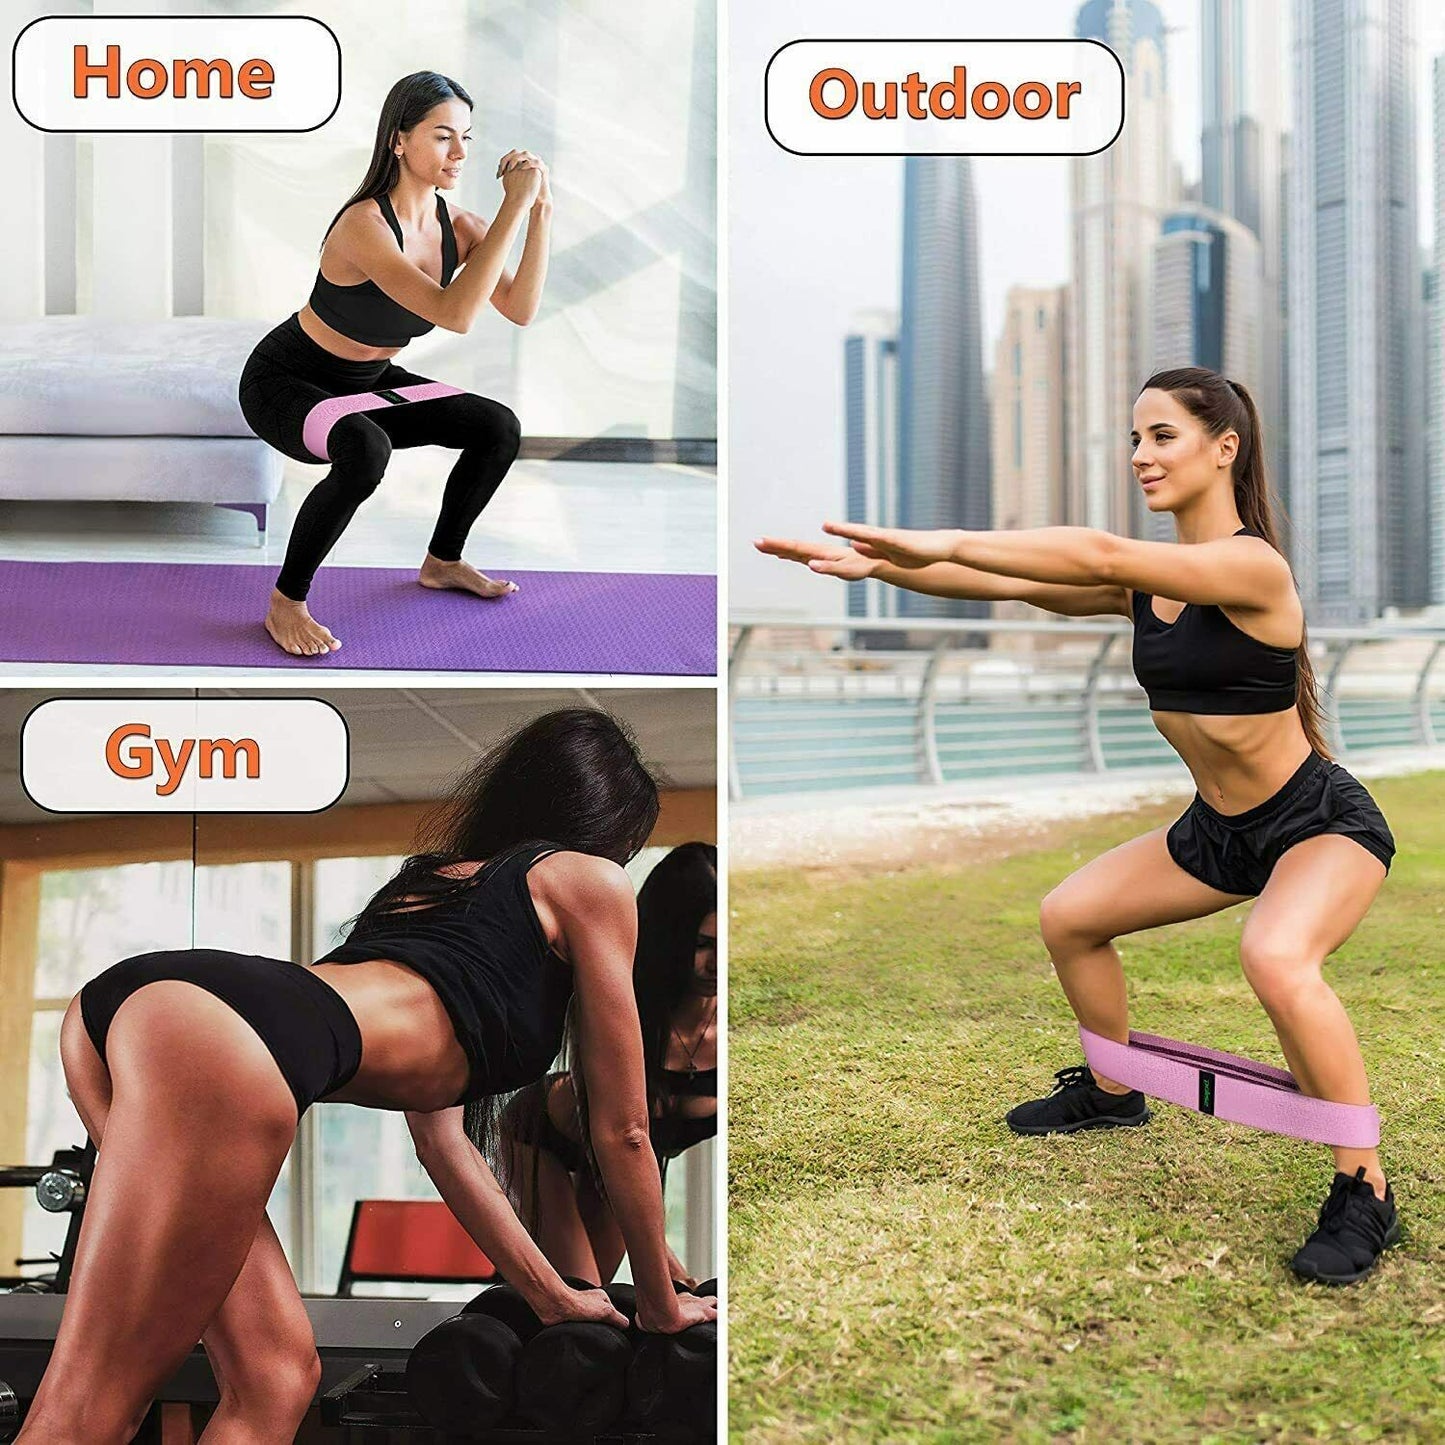 Workout Resistance Bands Loop Set Fitness Yoga Legs & Butt Workout Exercise Band - Jolie Divinity